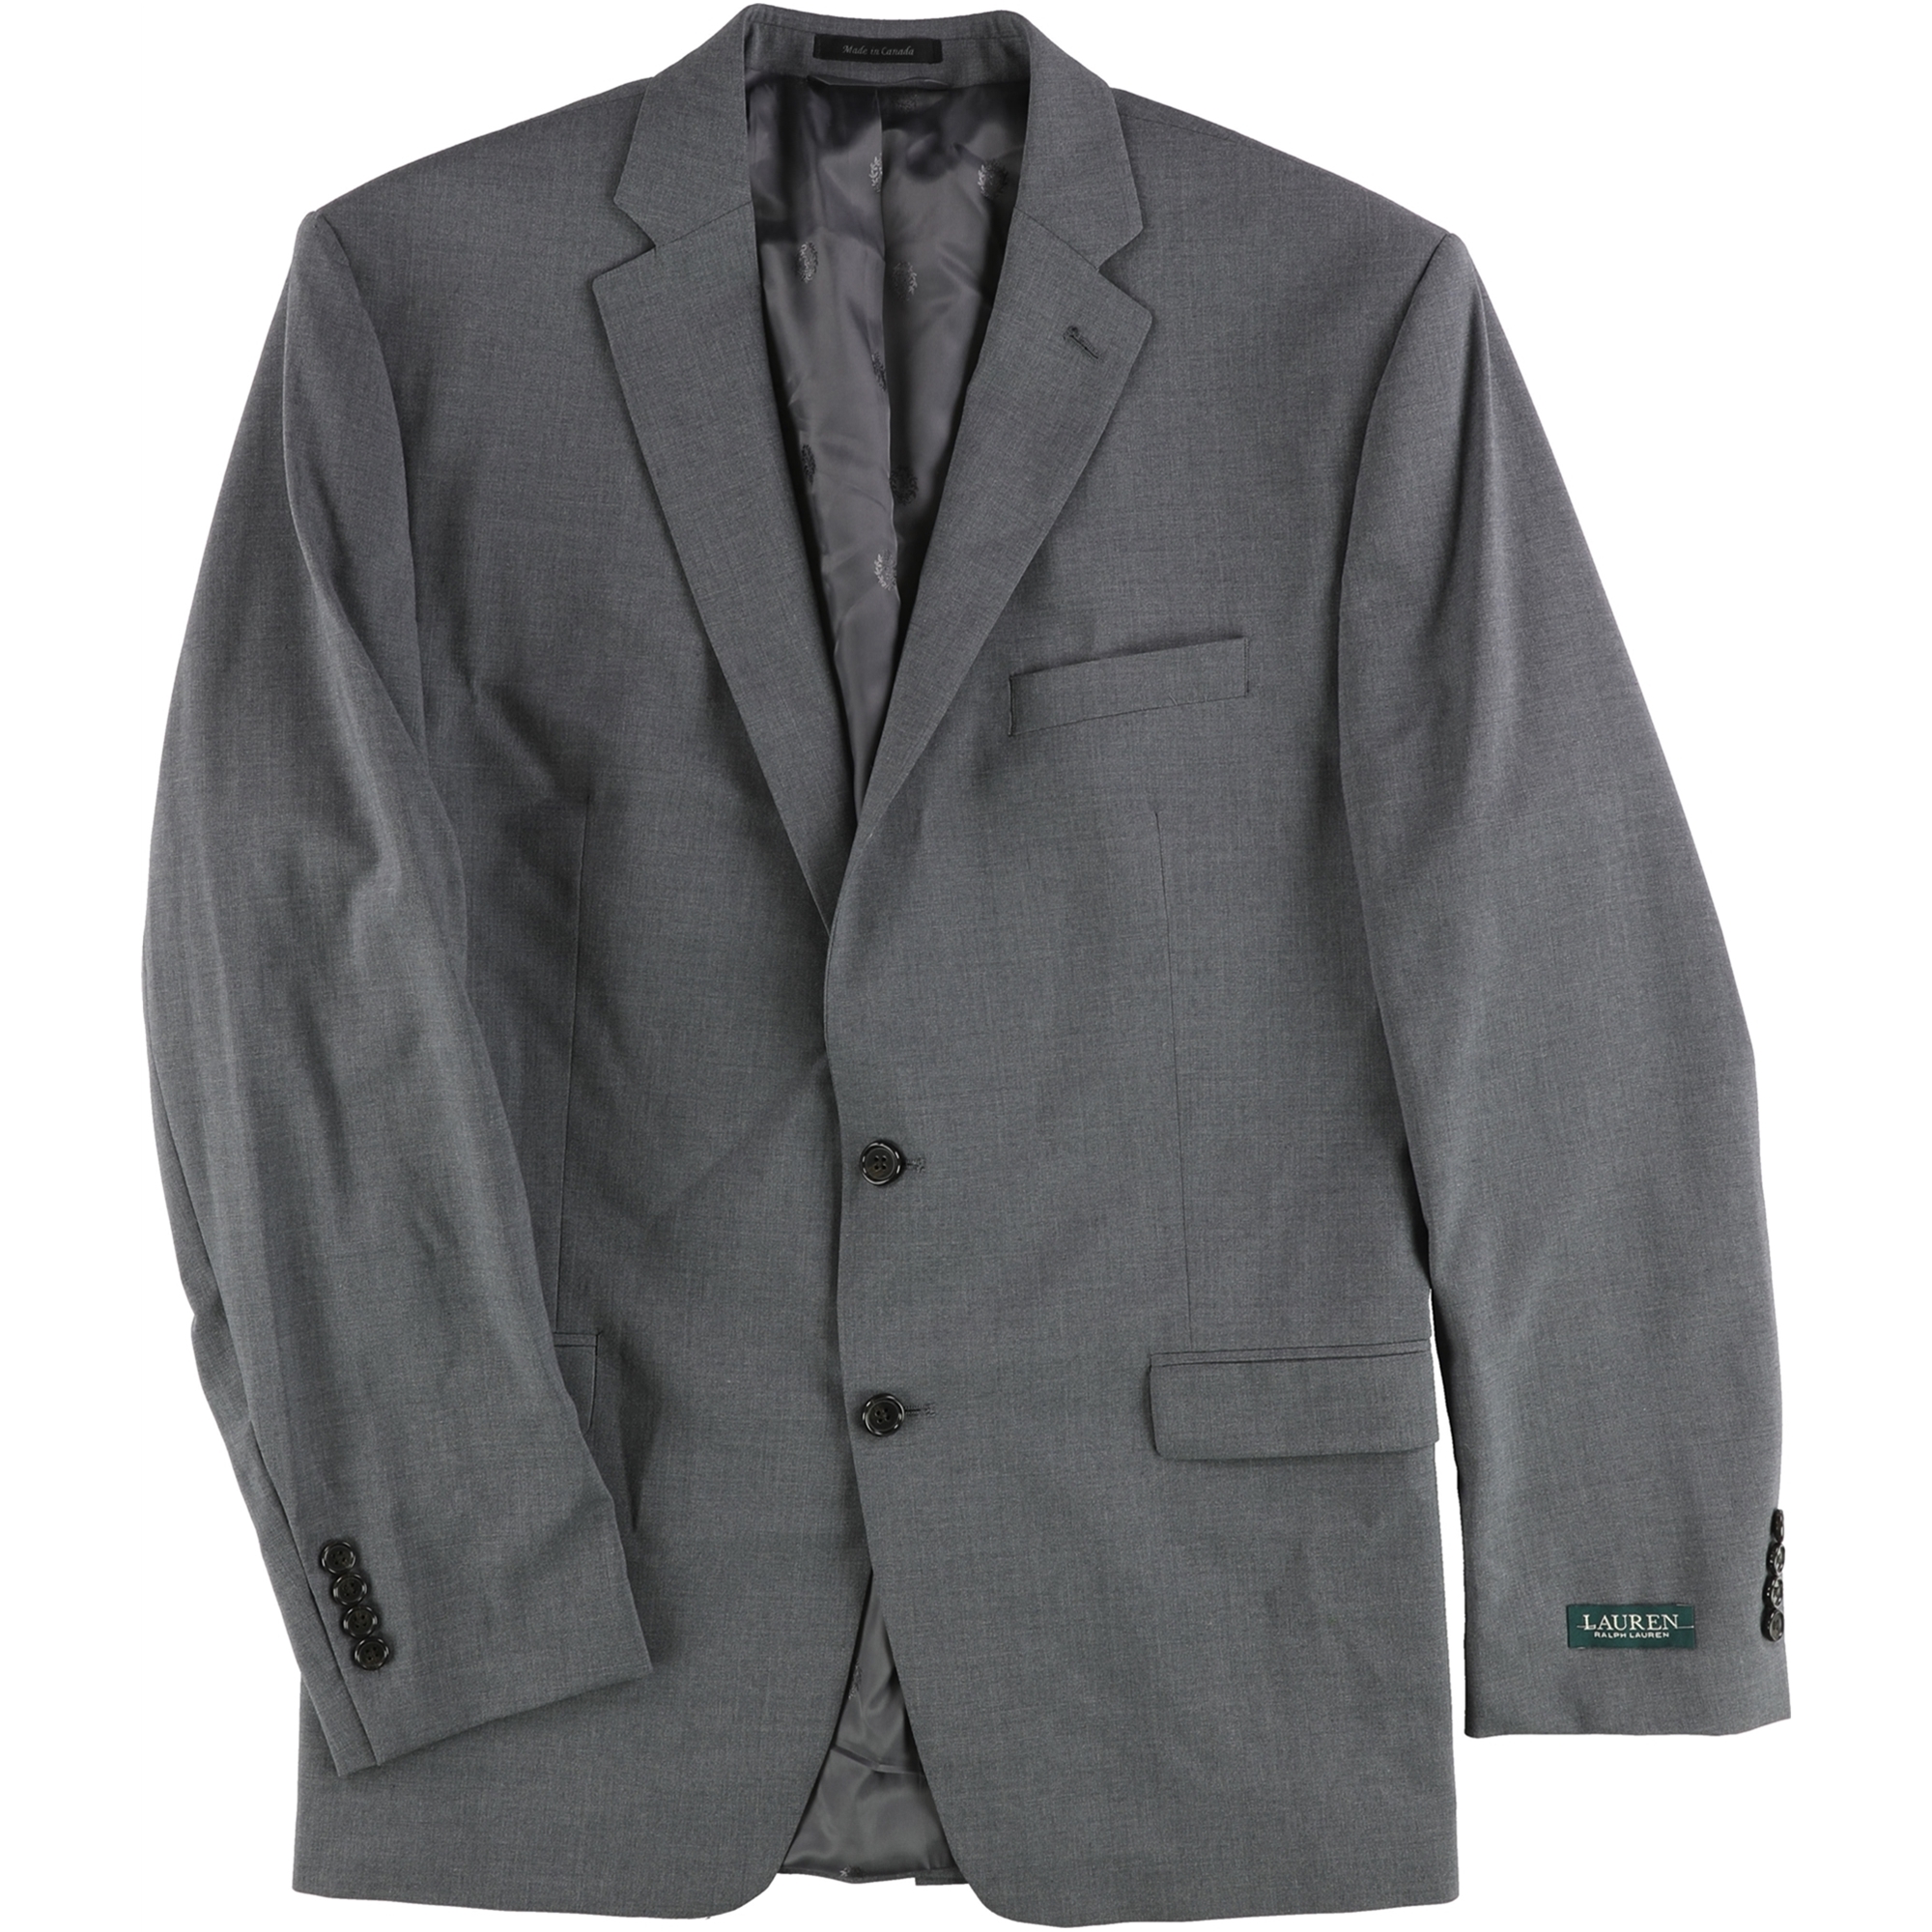 Ralph Lauren Mens Classic-Fit Two Button Formal Suit mediumgrey 38/Unfinished - image 2 of 2